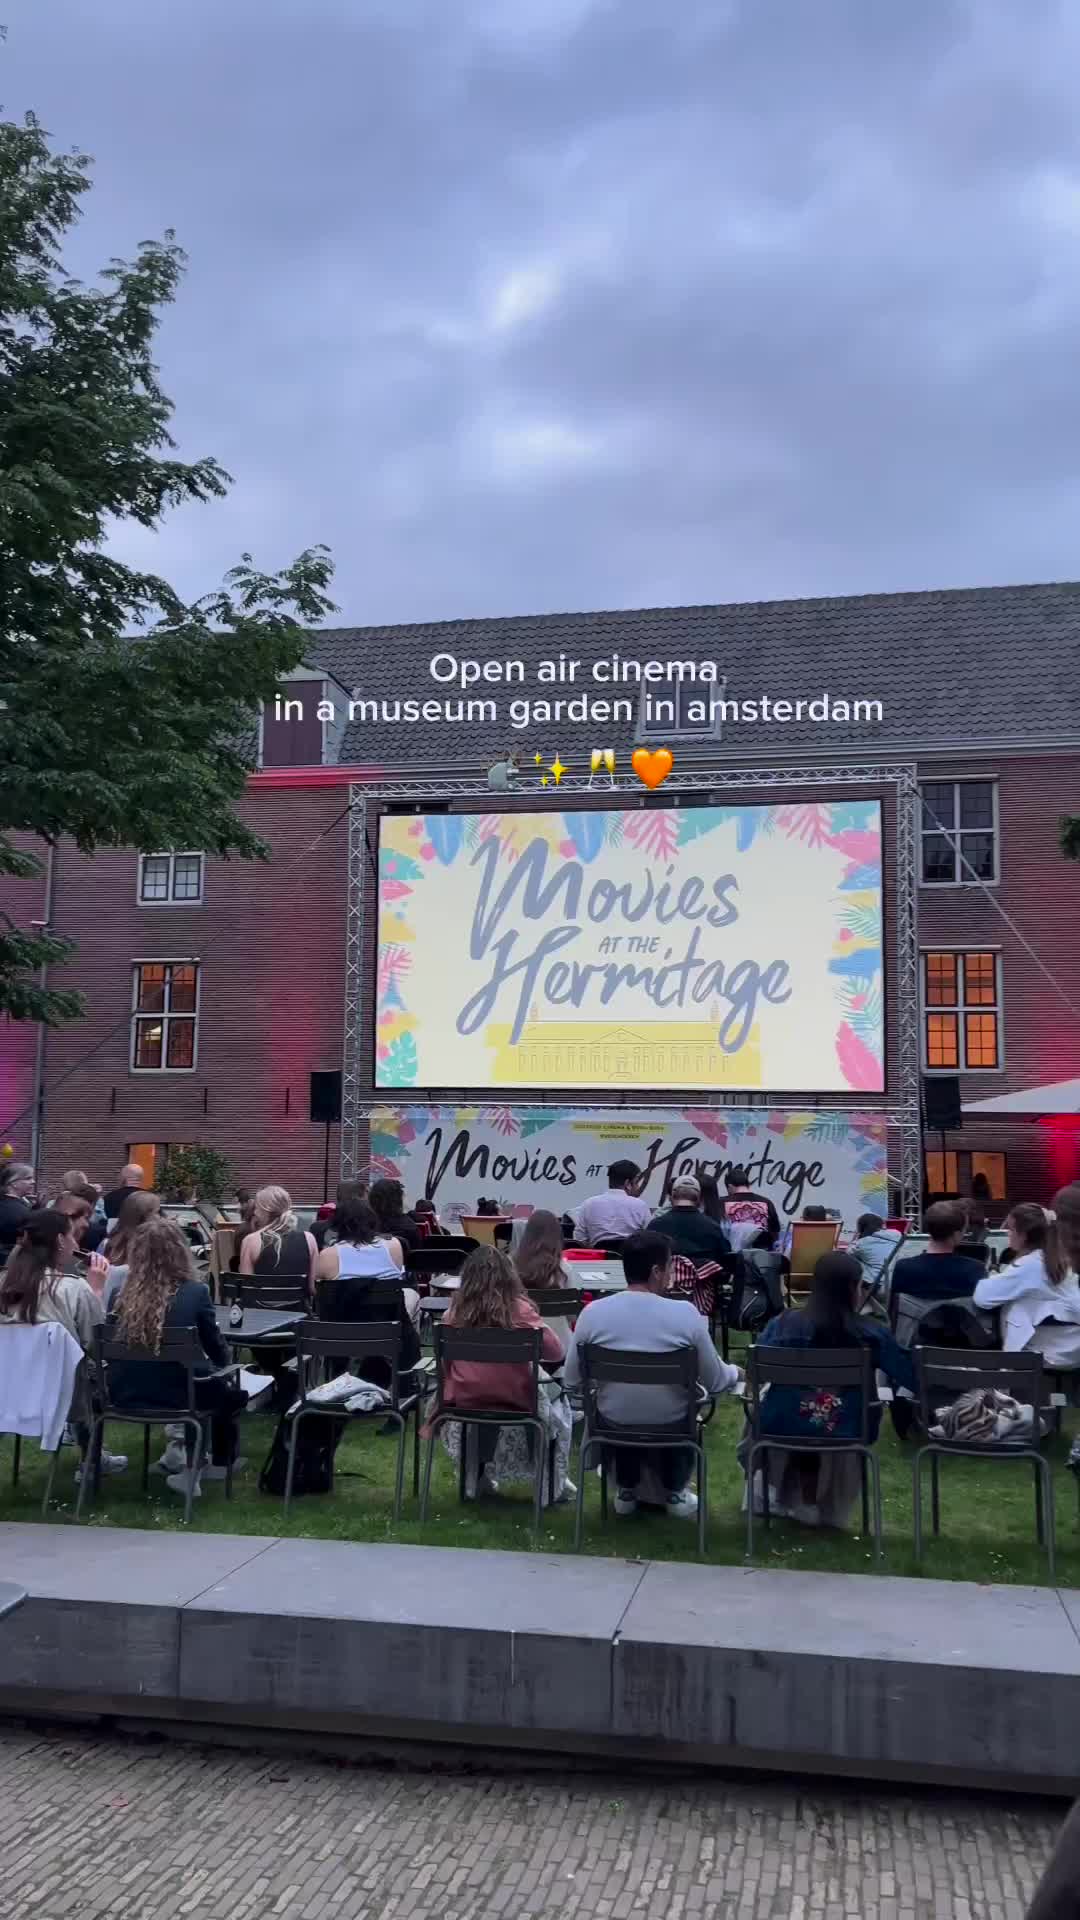 Summer Evenings at Hermitage Amsterdam 🎬✨